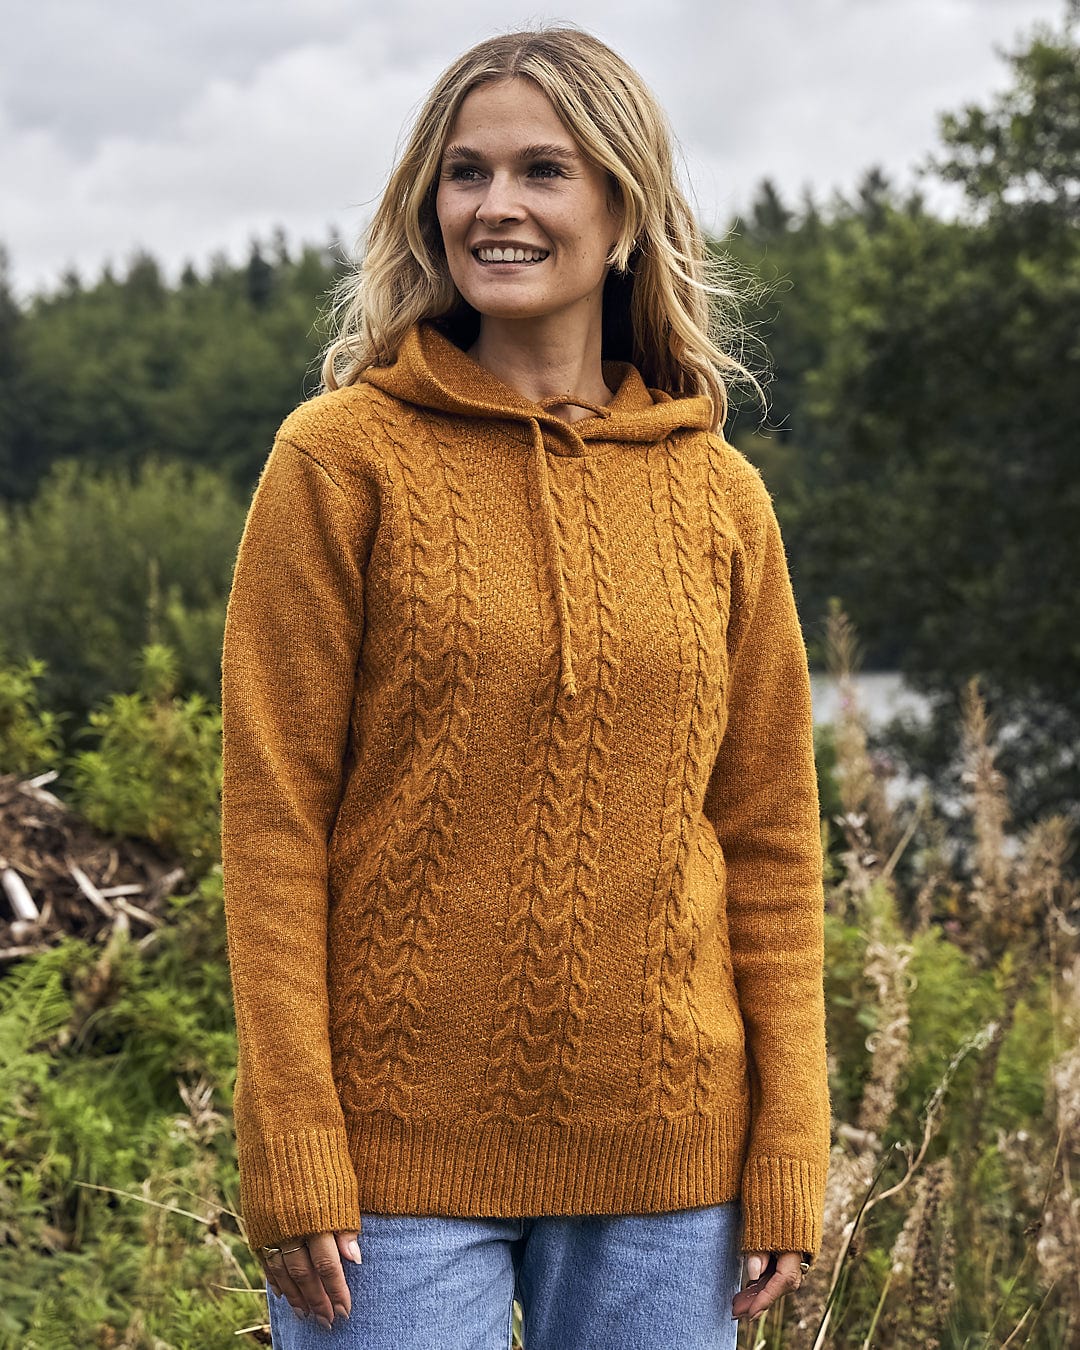 A woman in a Saltrock Hele Bay 2 - Womens Knitted Jumper - Yellow standing in a field.